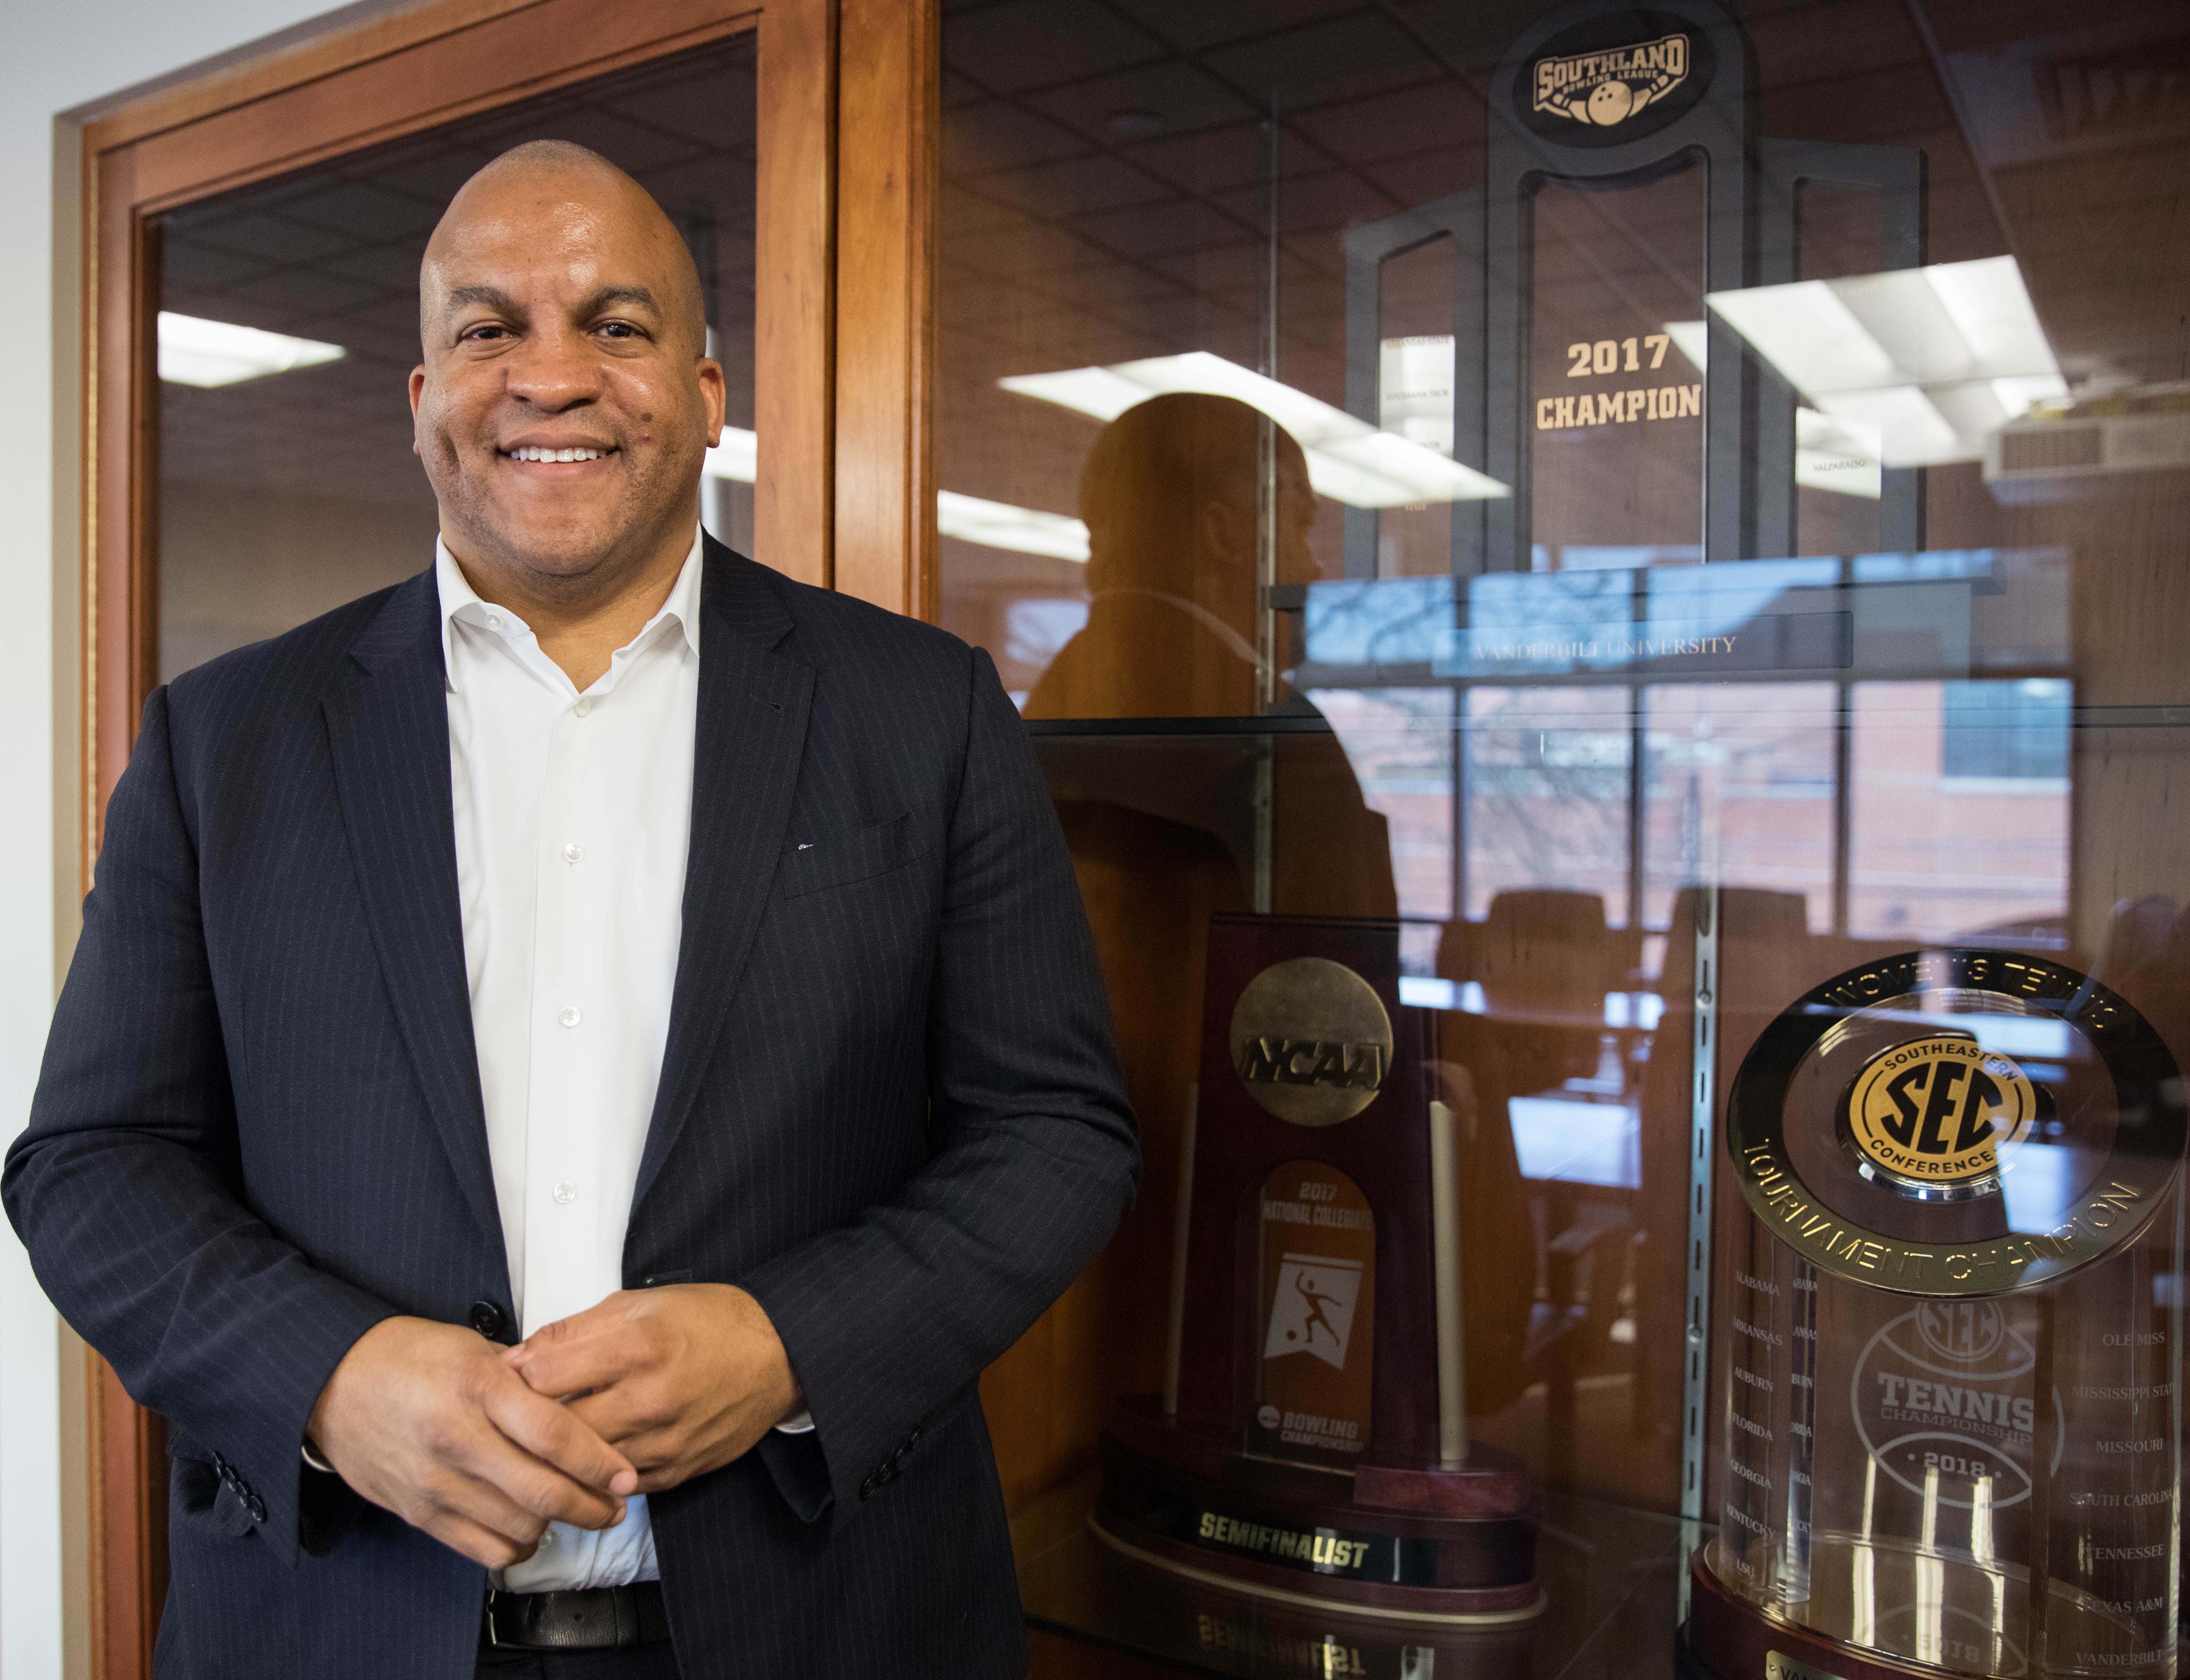 Malcolm Turner poses during his first day as Vanderbilt Athletic Director on Friday, February 1, 2019.